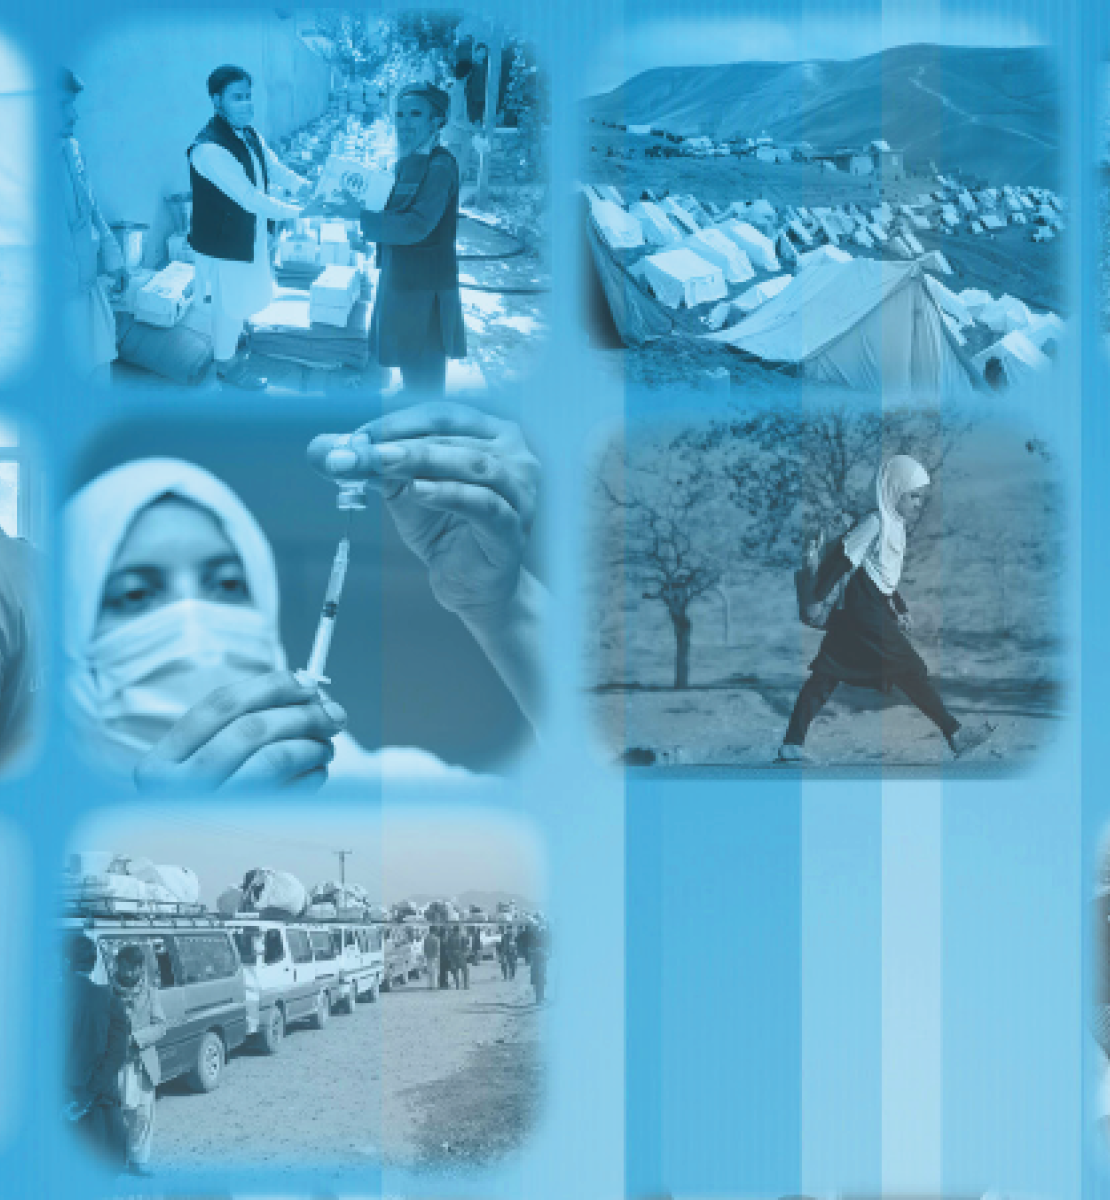 Several black and white images of people in Afghanistan under a blue tint. 